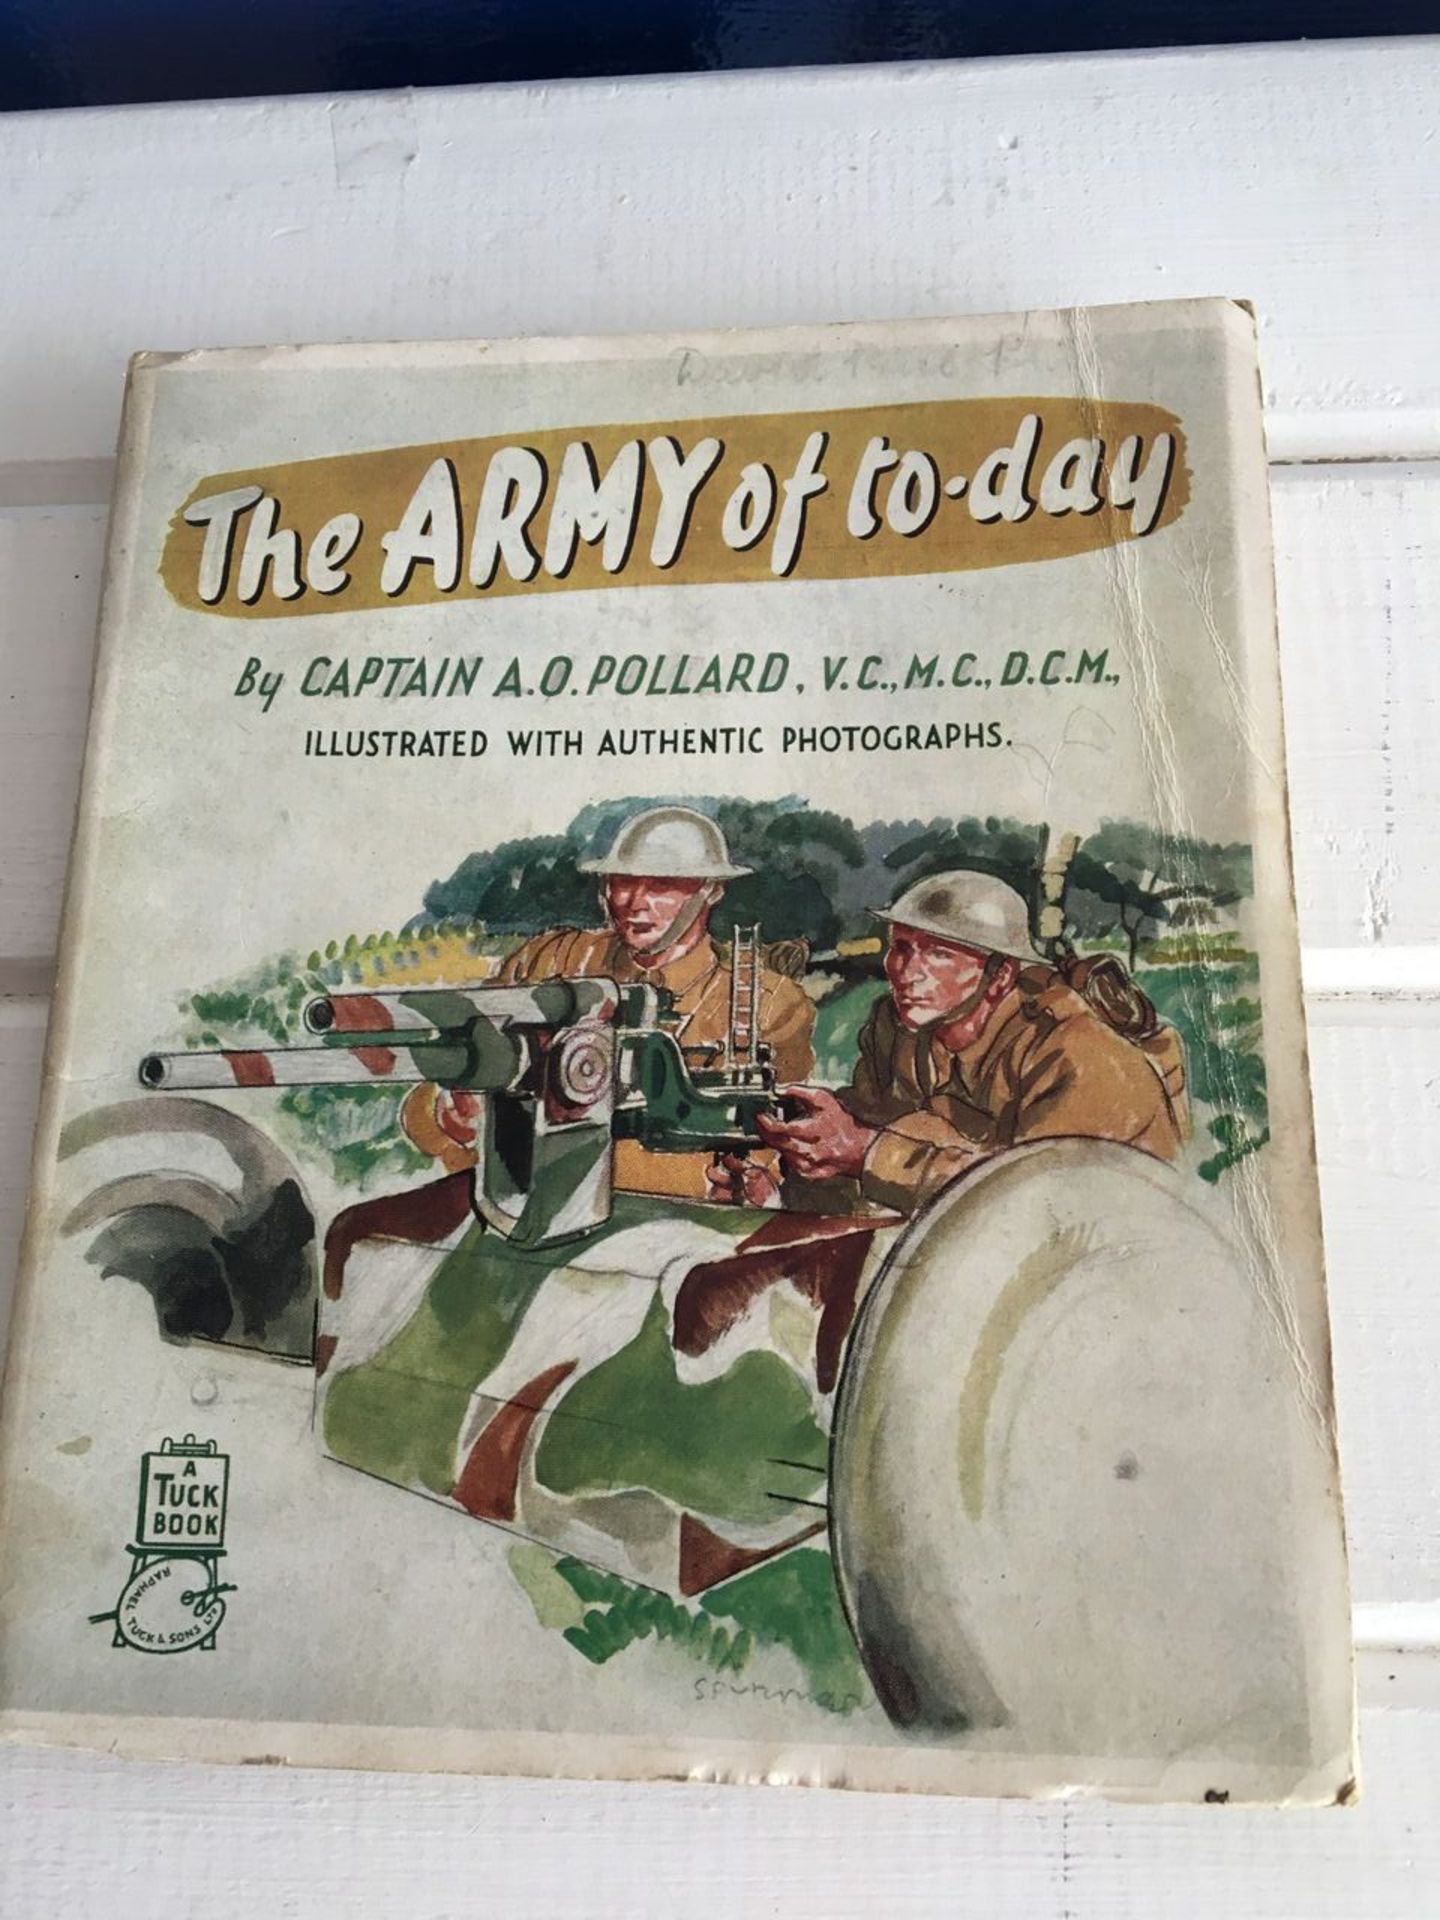 WW2 BOOK - TUCK & SONS - THE ARMY OF TODAY BY CAPTAIN A O POLLARD. 48 PAGES. FREE UK DELIVERY. NO